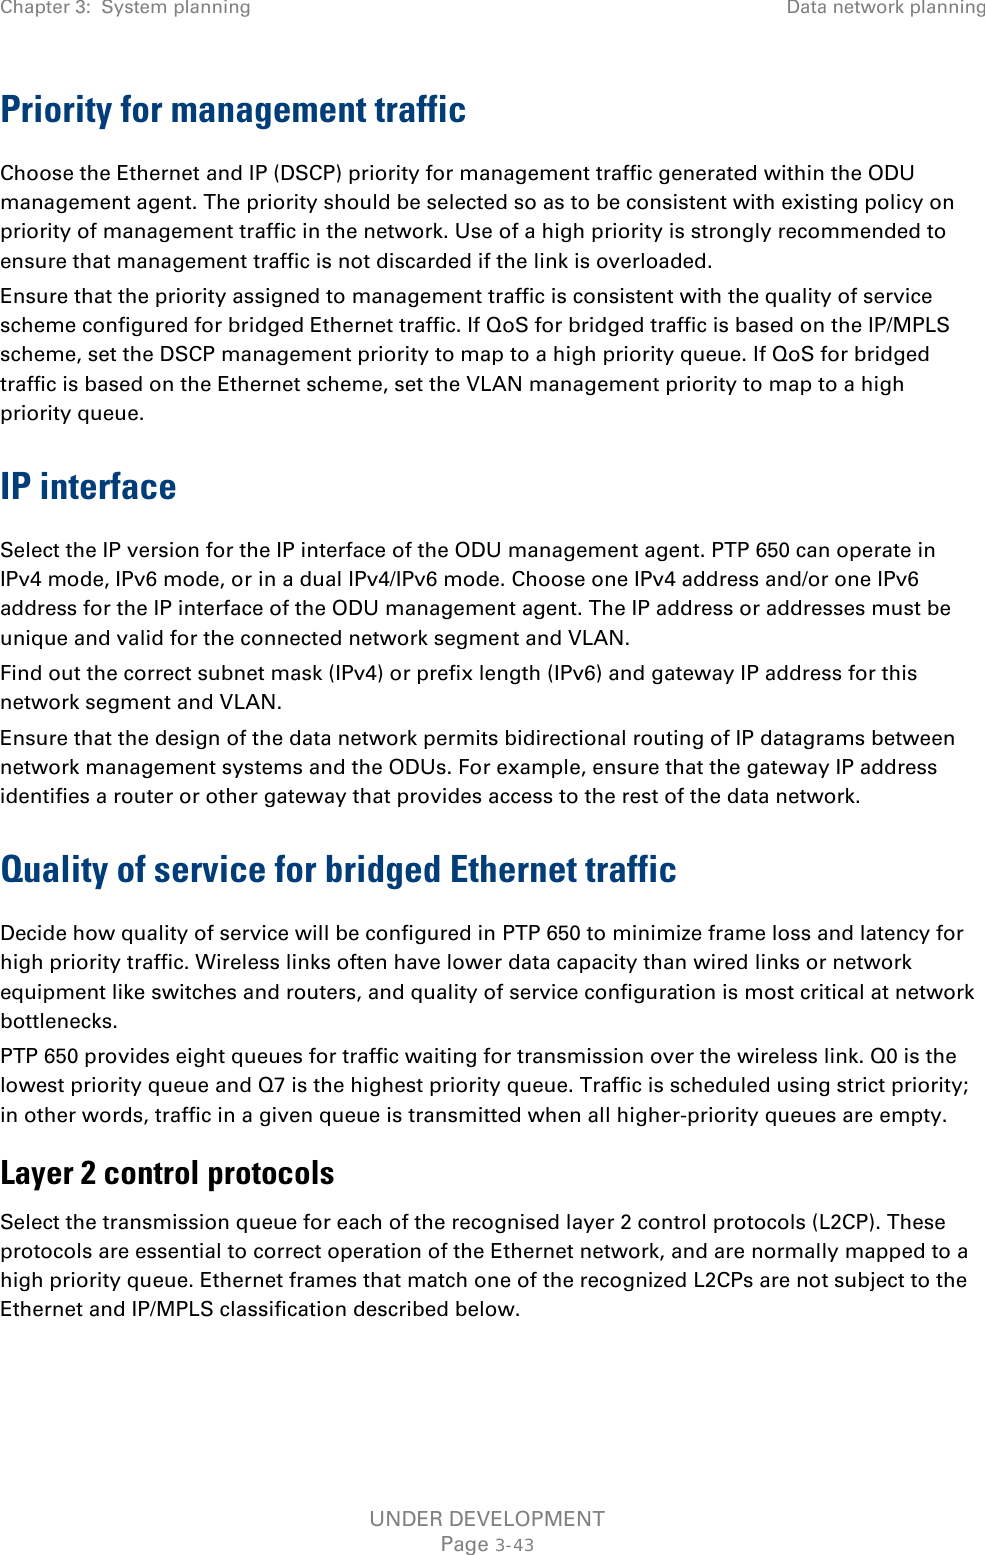 Chapter 3:  System planning Data network planning  Priority for management traffic Choose the Ethernet and IP (DSCP) priority for management traffic generated within the ODU management agent. The priority should be selected so as to be consistent with existing policy on priority of management traffic in the network. Use of a high priority is strongly recommended to ensure that management traffic is not discarded if the link is overloaded. Ensure that the priority assigned to management traffic is consistent with the quality of service scheme configured for bridged Ethernet traffic. If QoS for bridged traffic is based on the IP/MPLS scheme, set the DSCP management priority to map to a high priority queue. If QoS for bridged traffic is based on the Ethernet scheme, set the VLAN management priority to map to a high priority queue. IP interface Select the IP version for the IP interface of the ODU management agent. PTP 650 can operate in IPv4 mode, IPv6 mode, or in a dual IPv4/IPv6 mode. Choose one IPv4 address and/or one IPv6 address for the IP interface of the ODU management agent. The IP address or addresses must be unique and valid for the connected network segment and VLAN. Find out the correct subnet mask (IPv4) or prefix length (IPv6) and gateway IP address for this network segment and VLAN. Ensure that the design of the data network permits bidirectional routing of IP datagrams between network management systems and the ODUs. For example, ensure that the gateway IP address identifies a router or other gateway that provides access to the rest of the data network. Quality of service for bridged Ethernet traffic Decide how quality of service will be configured in PTP 650 to minimize frame loss and latency for high priority traffic. Wireless links often have lower data capacity than wired links or network equipment like switches and routers, and quality of service configuration is most critical at network bottlenecks. PTP 650 provides eight queues for traffic waiting for transmission over the wireless link. Q0 is the lowest priority queue and Q7 is the highest priority queue. Traffic is scheduled using strict priority; in other words, traffic in a given queue is transmitted when all higher-priority queues are empty. Layer 2 control protocols Select the transmission queue for each of the recognised layer 2 control protocols (L2CP). These protocols are essential to correct operation of the Ethernet network, and are normally mapped to a high priority queue. Ethernet frames that match one of the recognized L2CPs are not subject to the Ethernet and IP/MPLS classification described below. UNDER DEVELOPMENT Page 3-43 